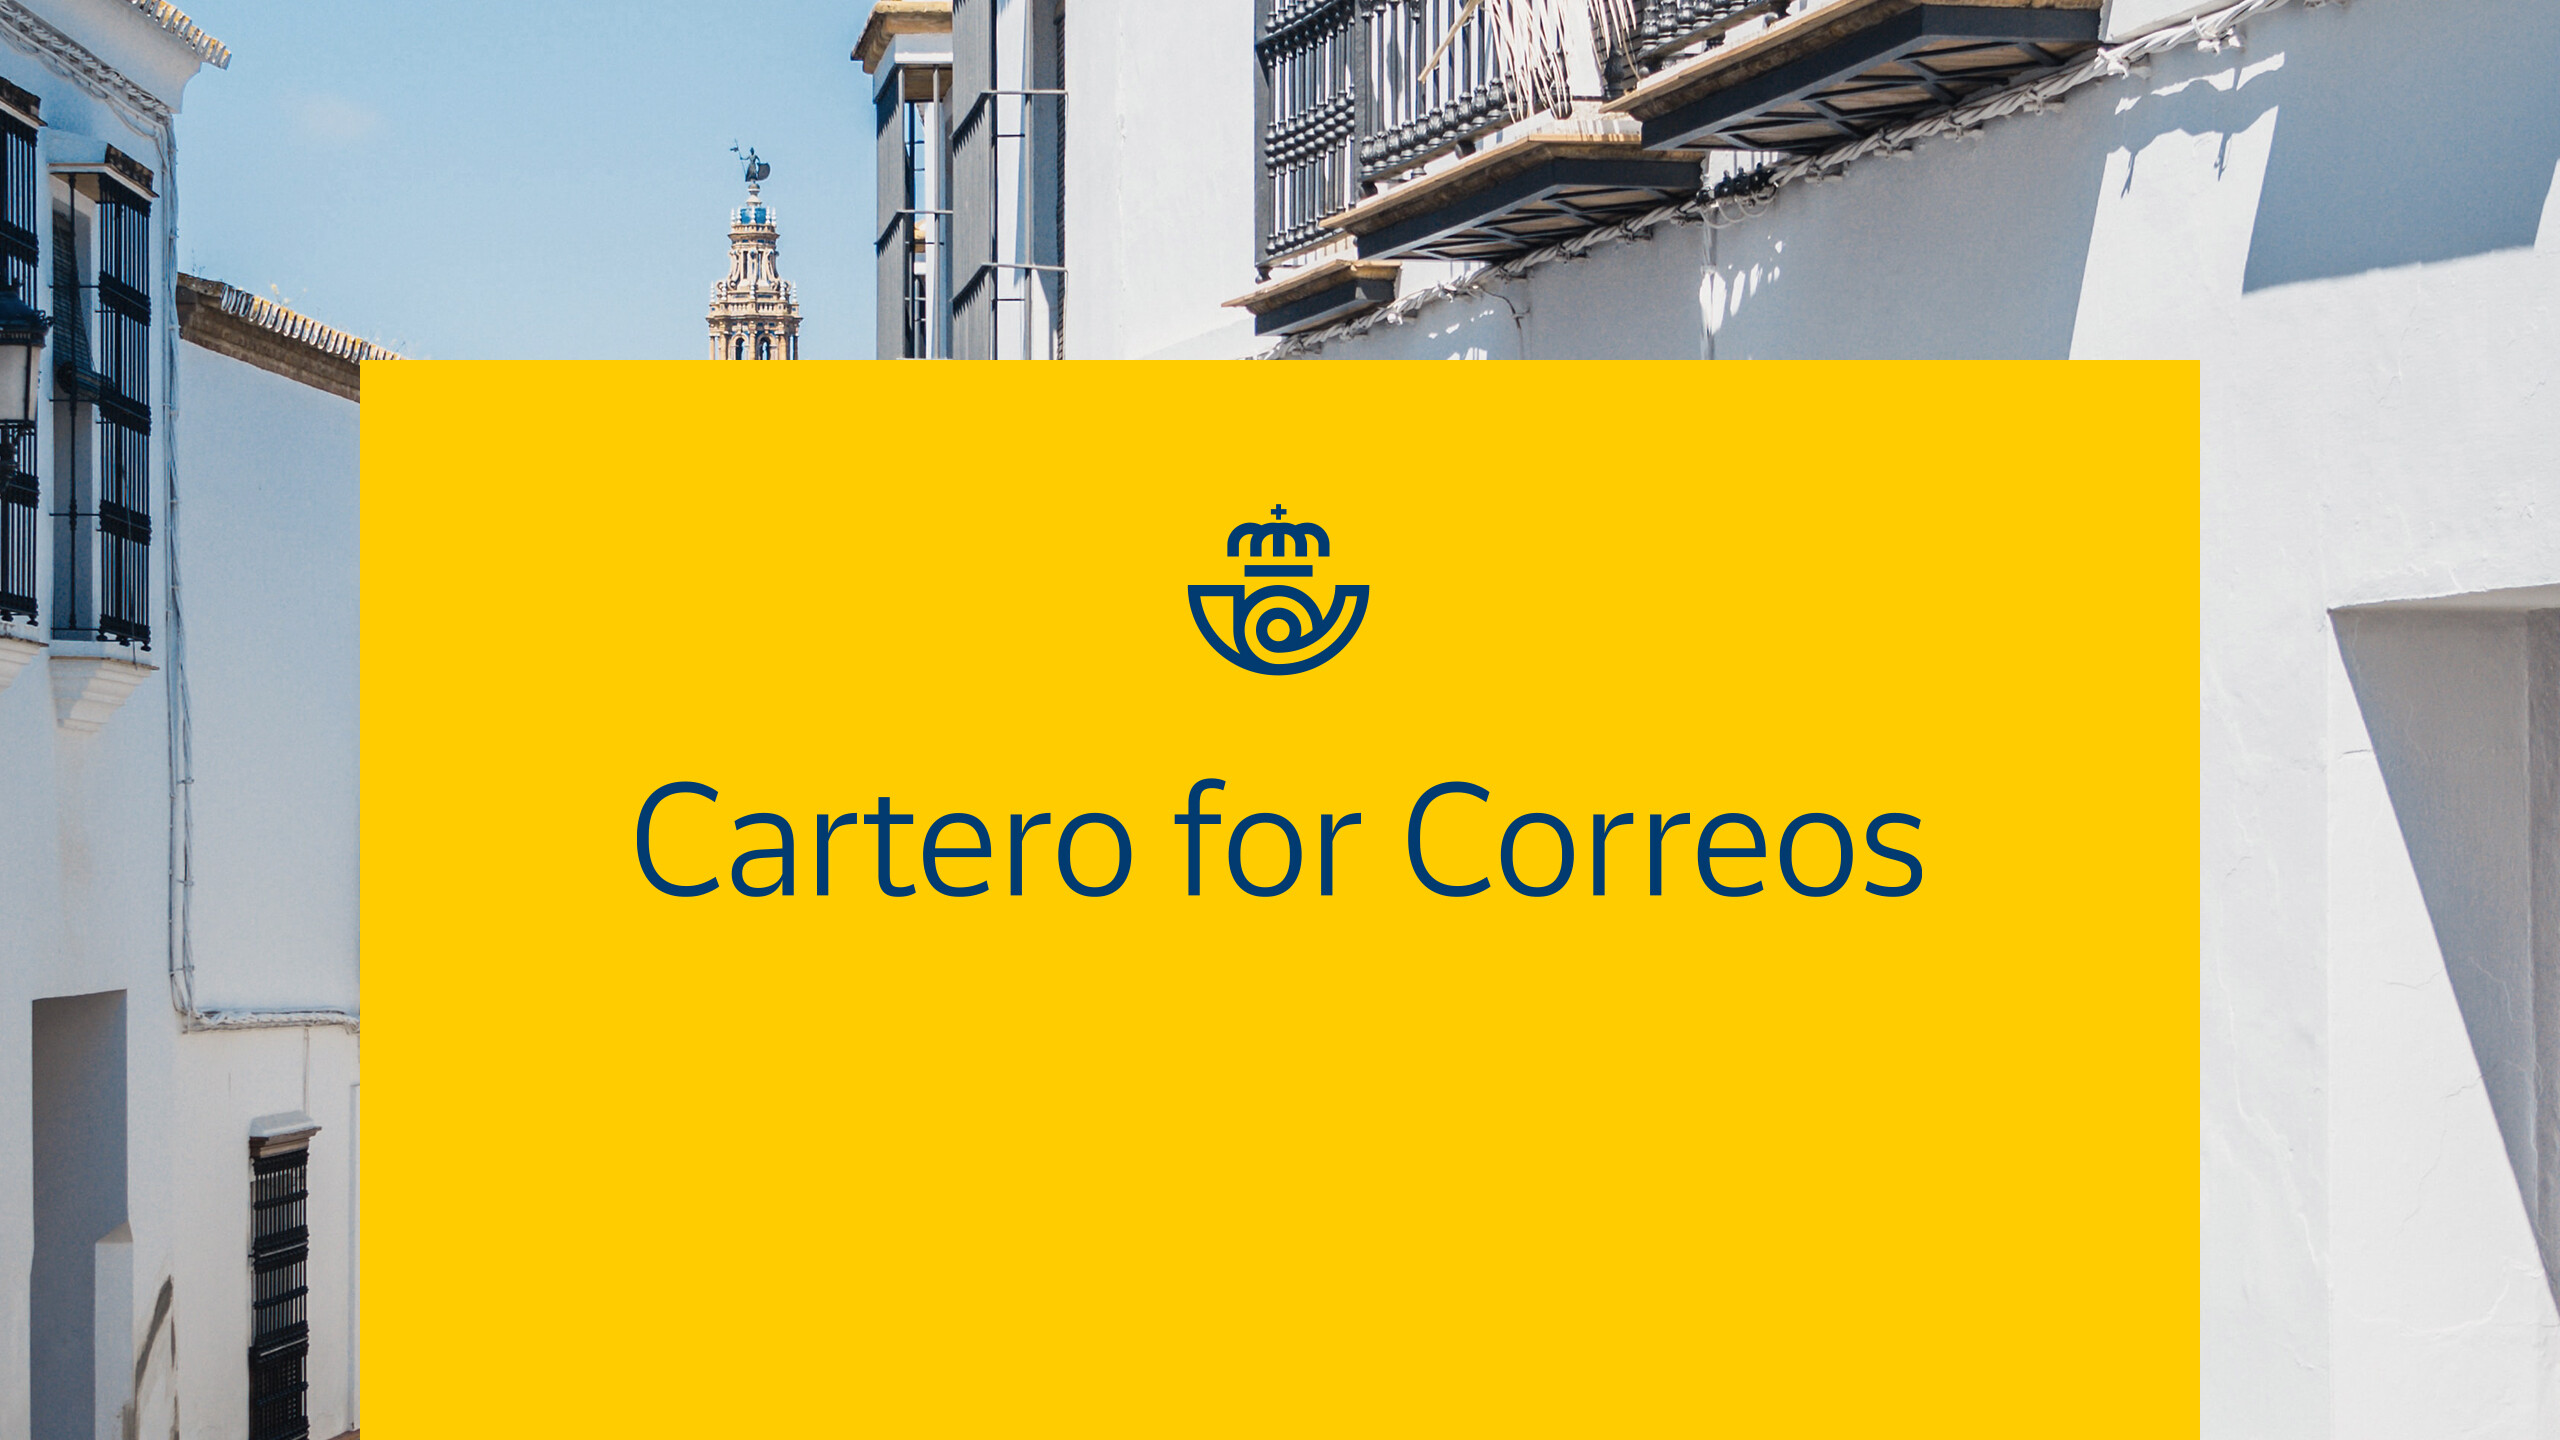 Cartero for Correos shown in the typeface against the backdrop of white Spanish buildings